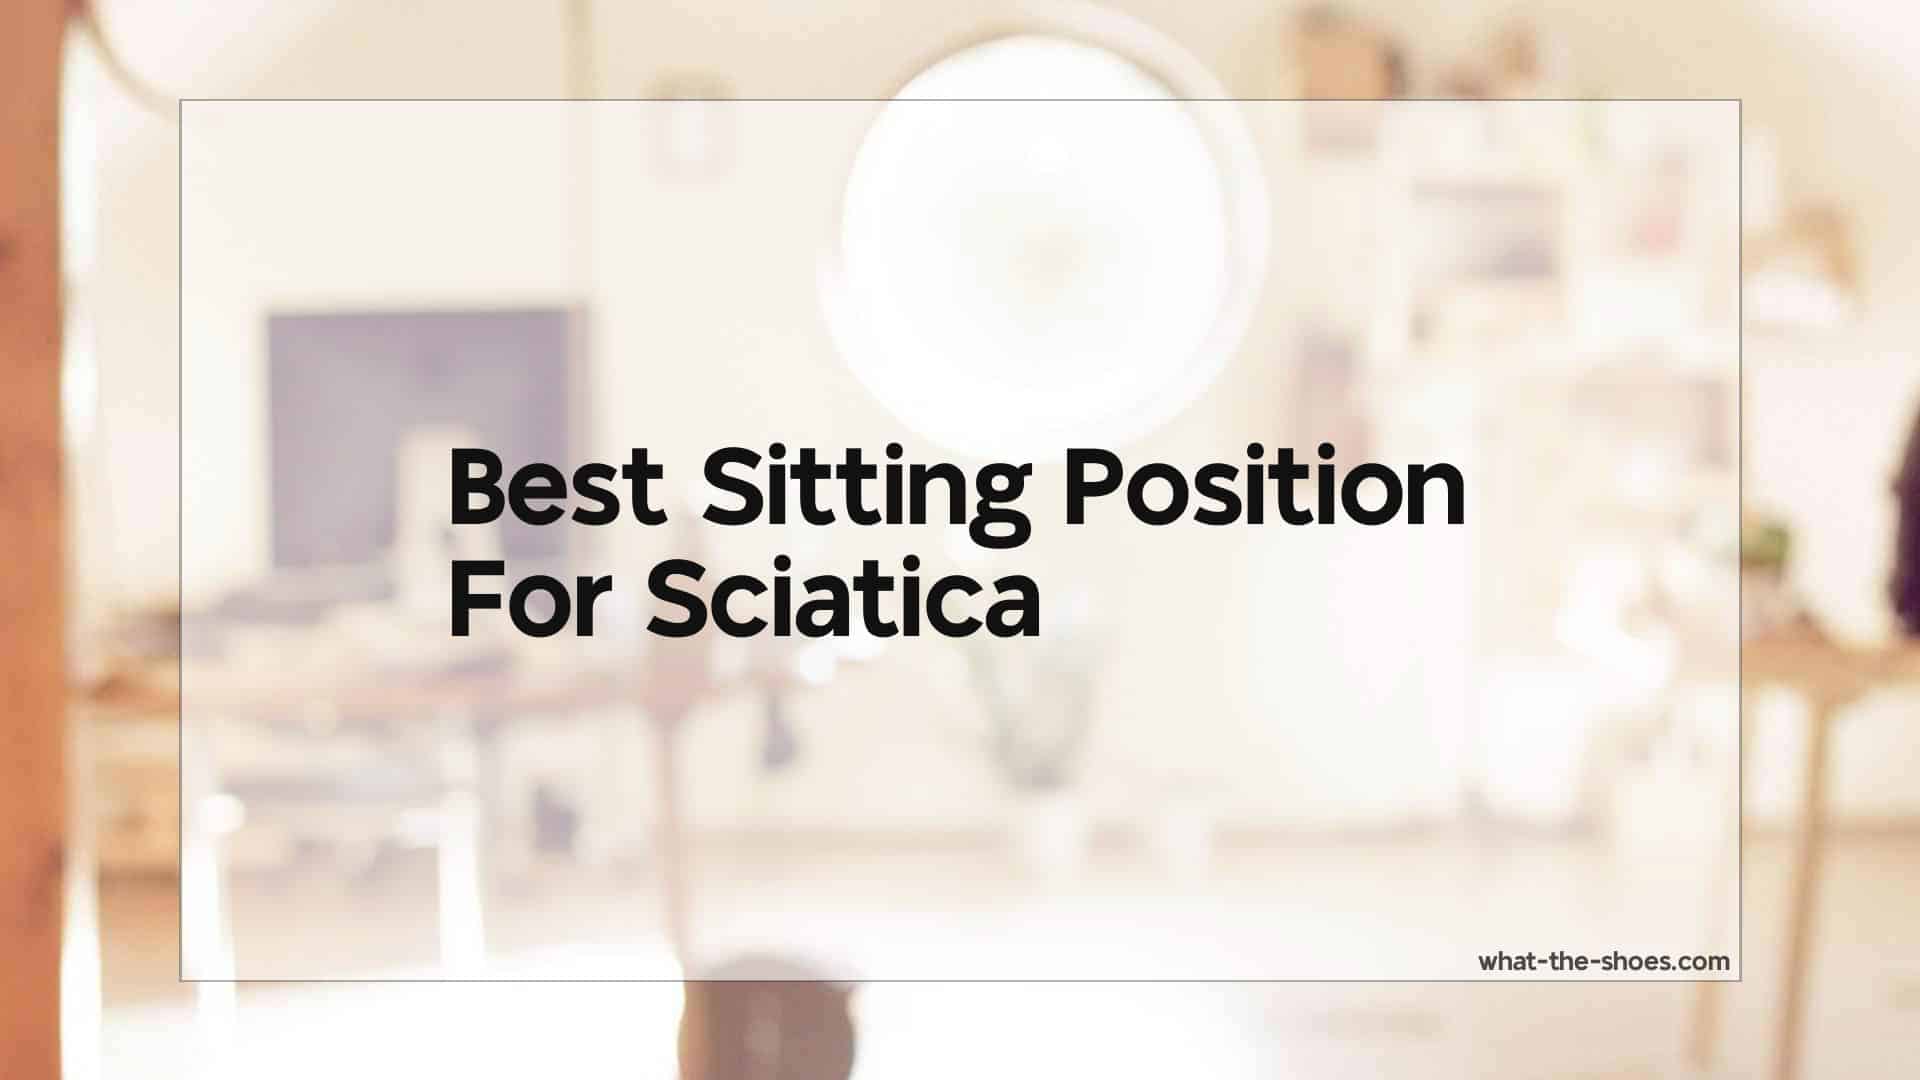 Best Sitting Position For Sciatica: A Comprehensive Guide